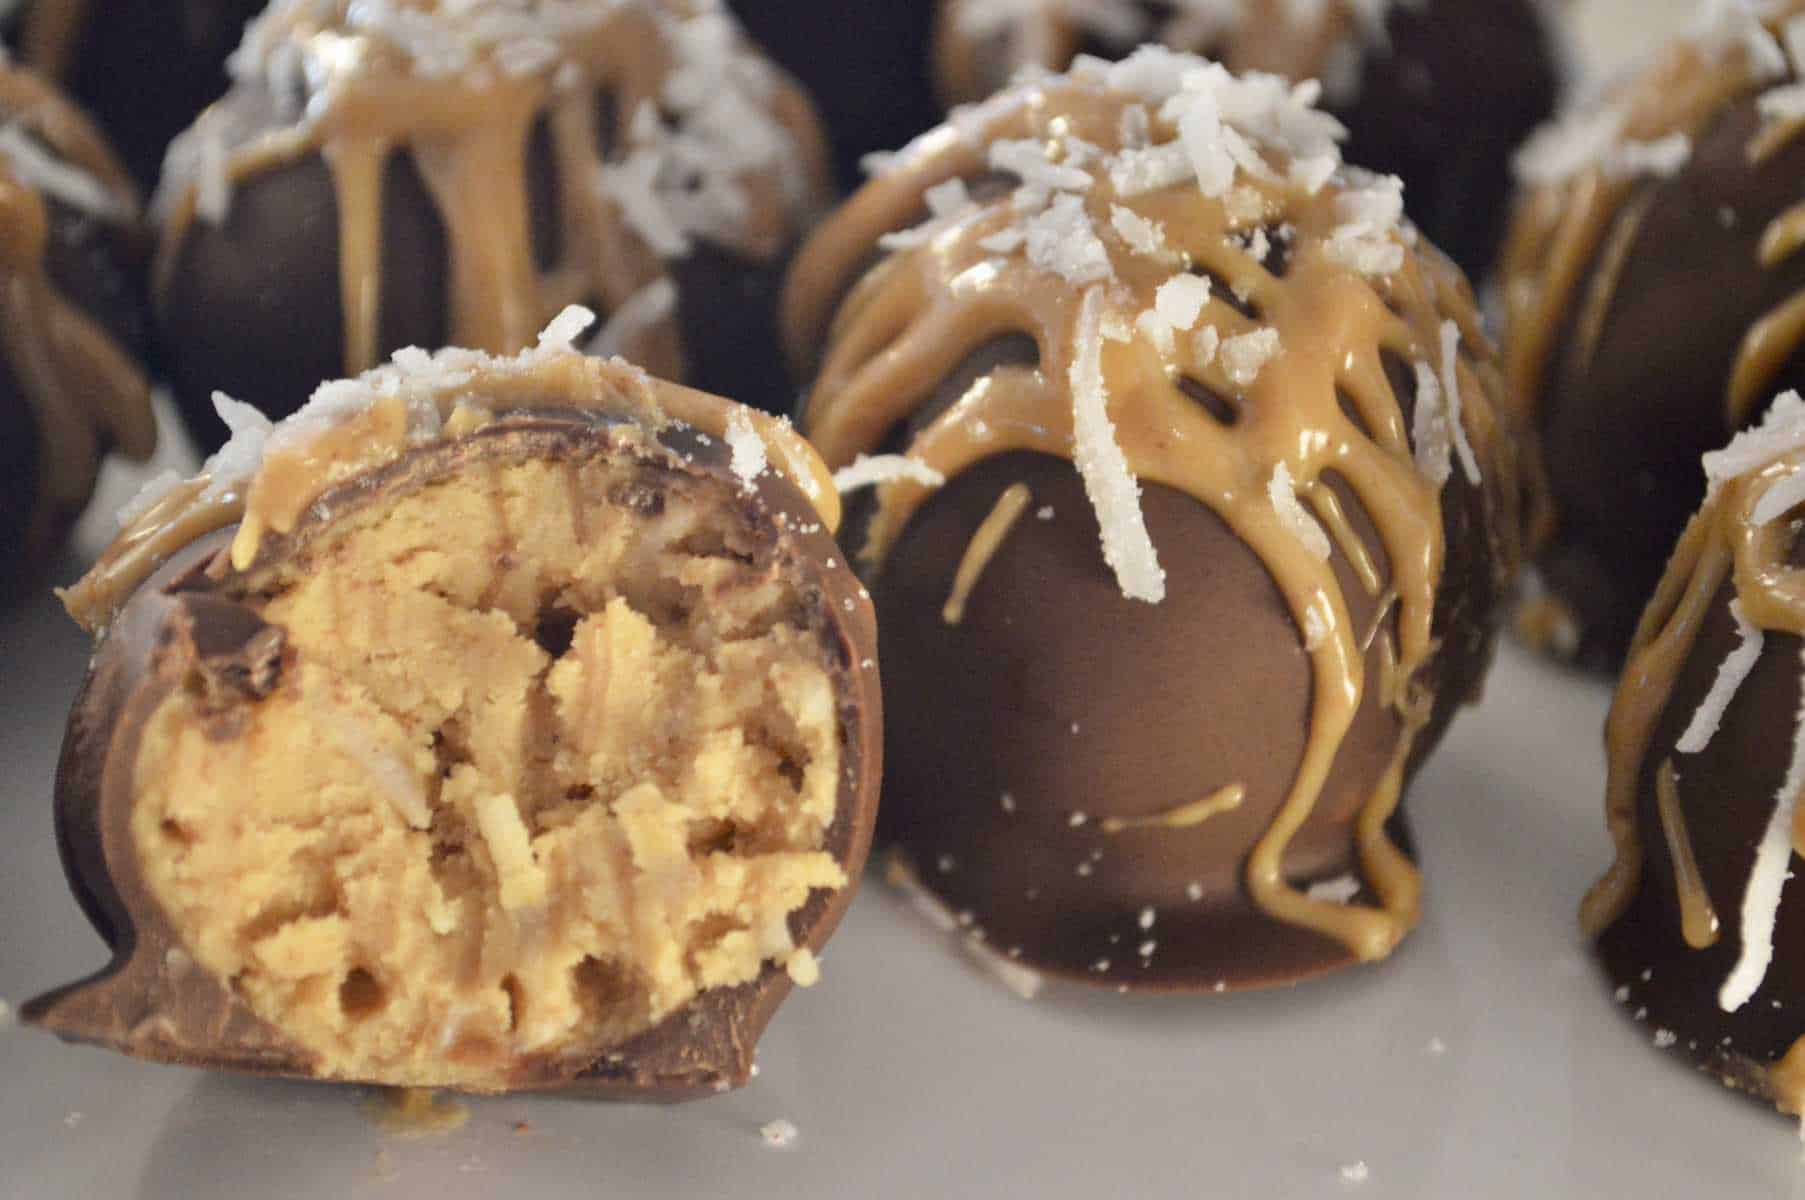 Peanut Butter Coconut Truffles on a white plate with a bite taken out of one